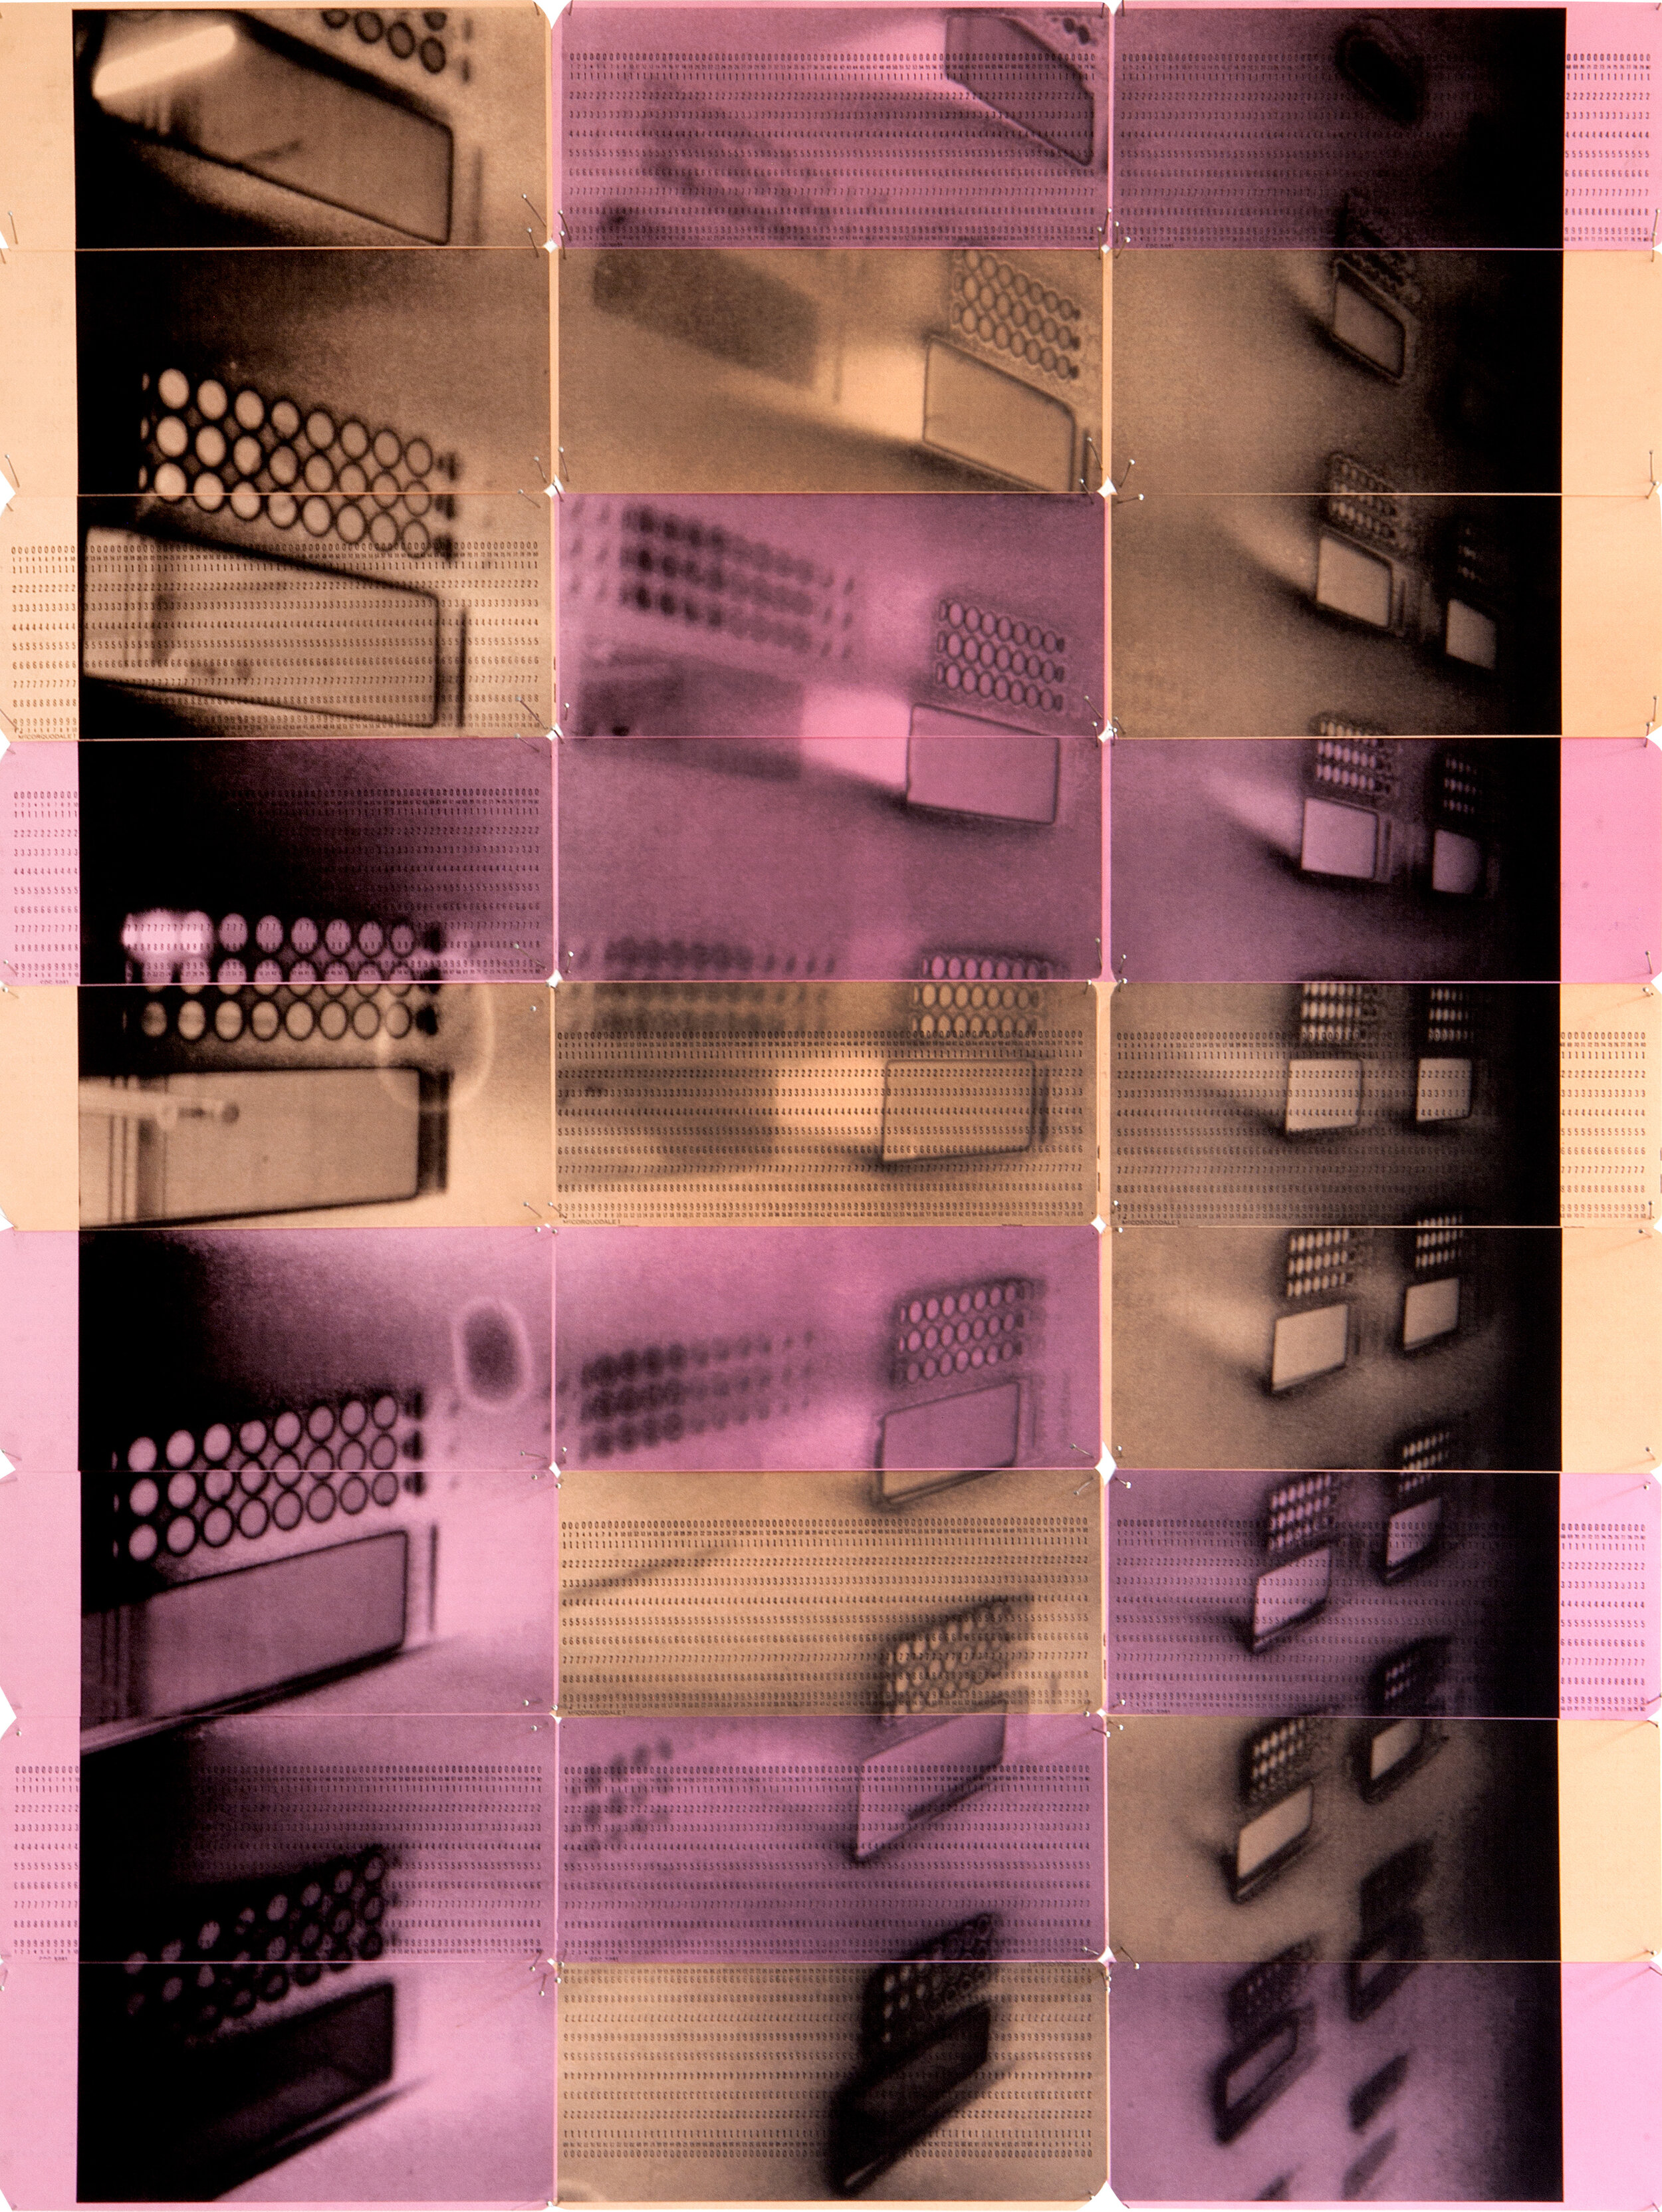 LDN5_06 2017 Inkjet on 27 pink and orange computer punch cards Negative date 2017 74.7 x 56.1 cm.jpg